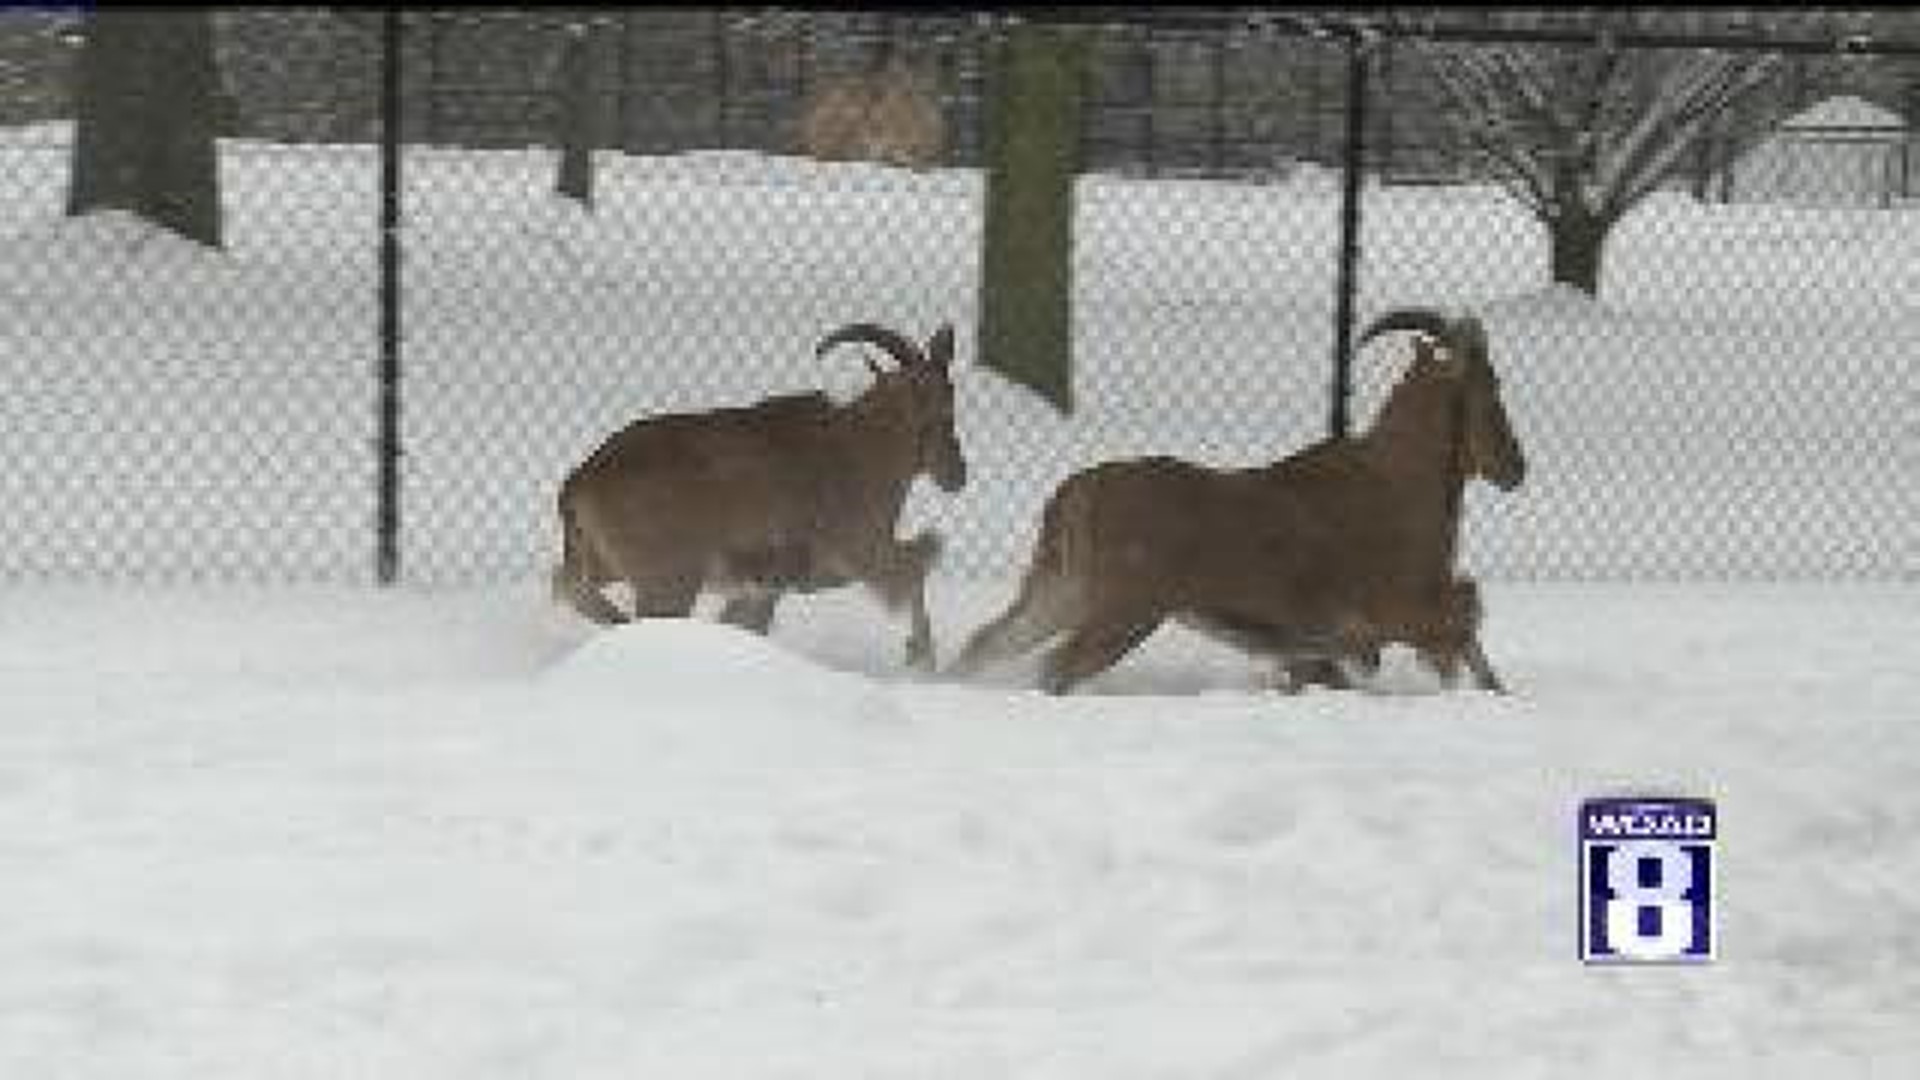 Zoo Continues to Operate Regardless of Snow